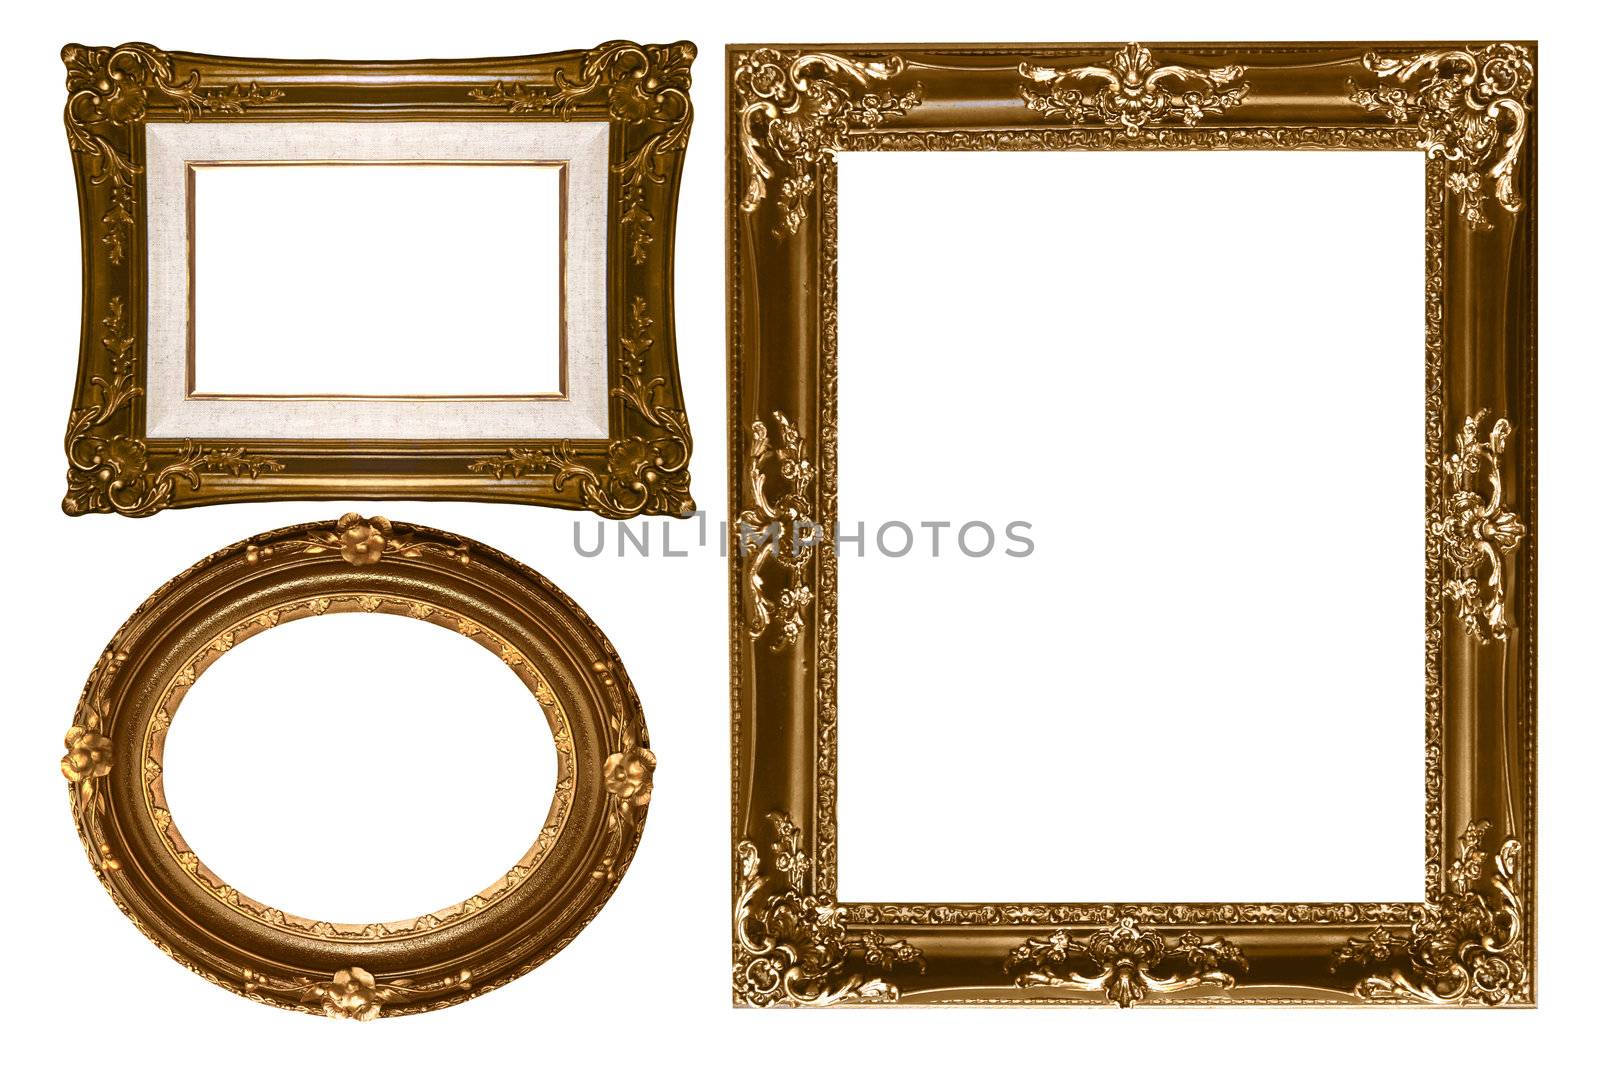 Oval and Rectangular Decorative Gold Empty Wall Picture Frames by tobkatrina